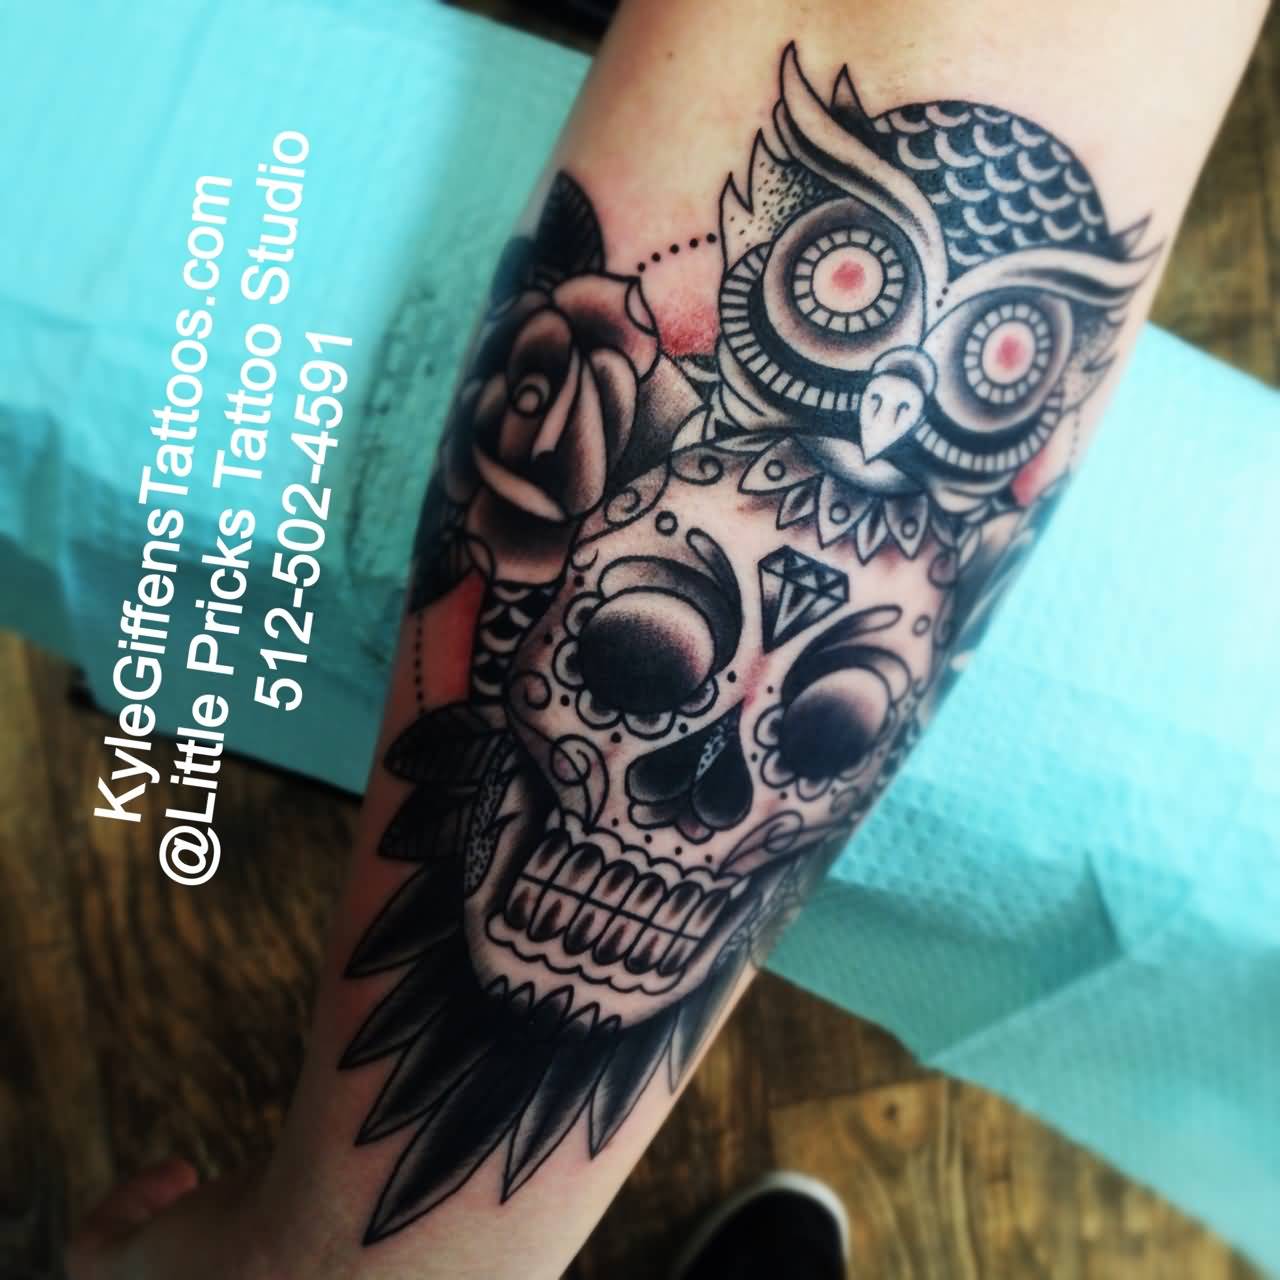 Traditional Owl With Sugar Skull Tattoo Design For Sleeve By Kyle Giffen